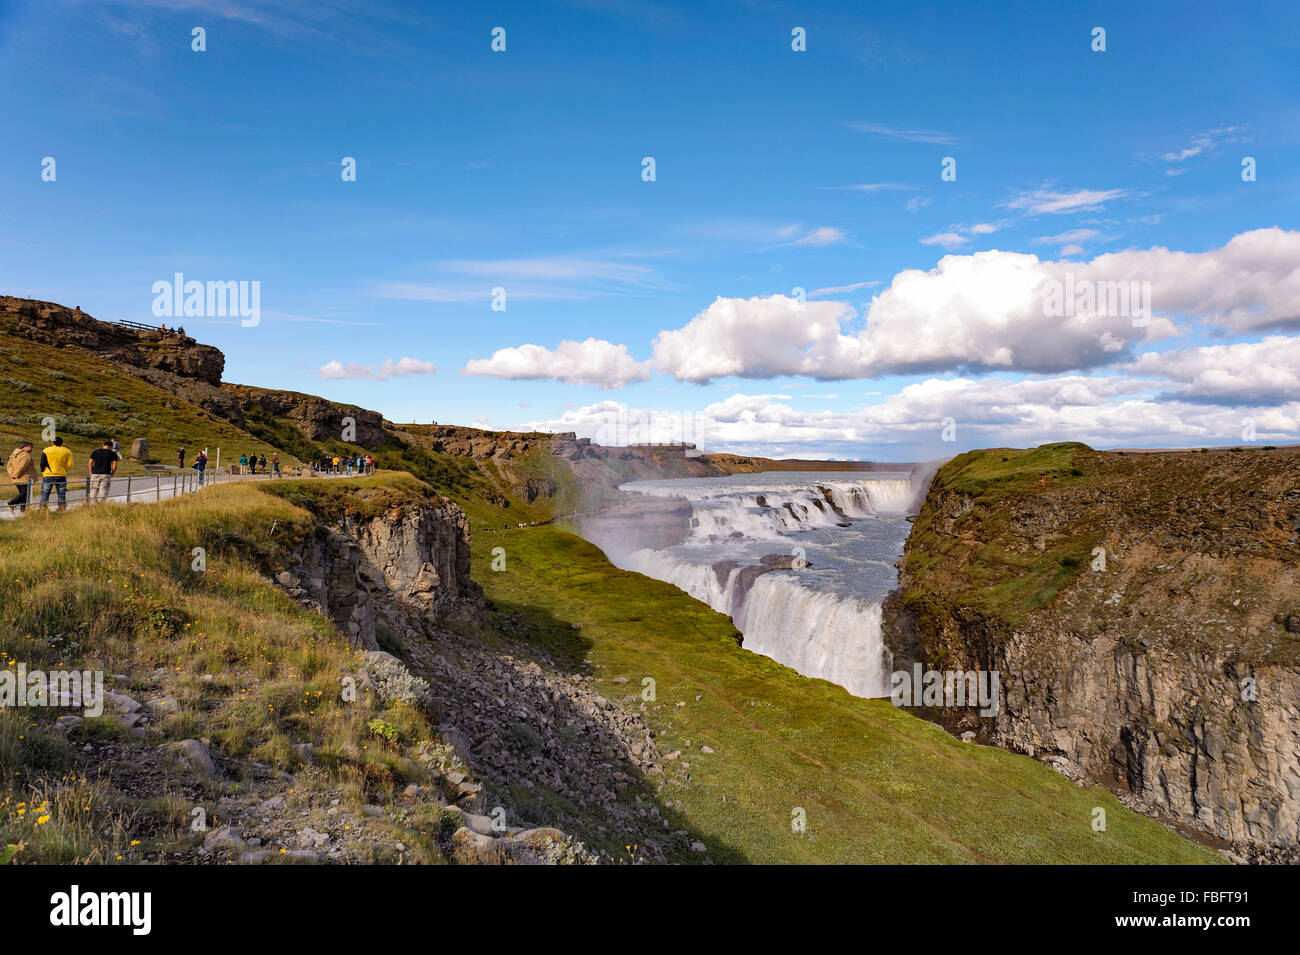 Gullfoss waterfall on the Golden Circle tour an Iceland landmark travel destination and wonder of nature with a double waterfall Stock Photo